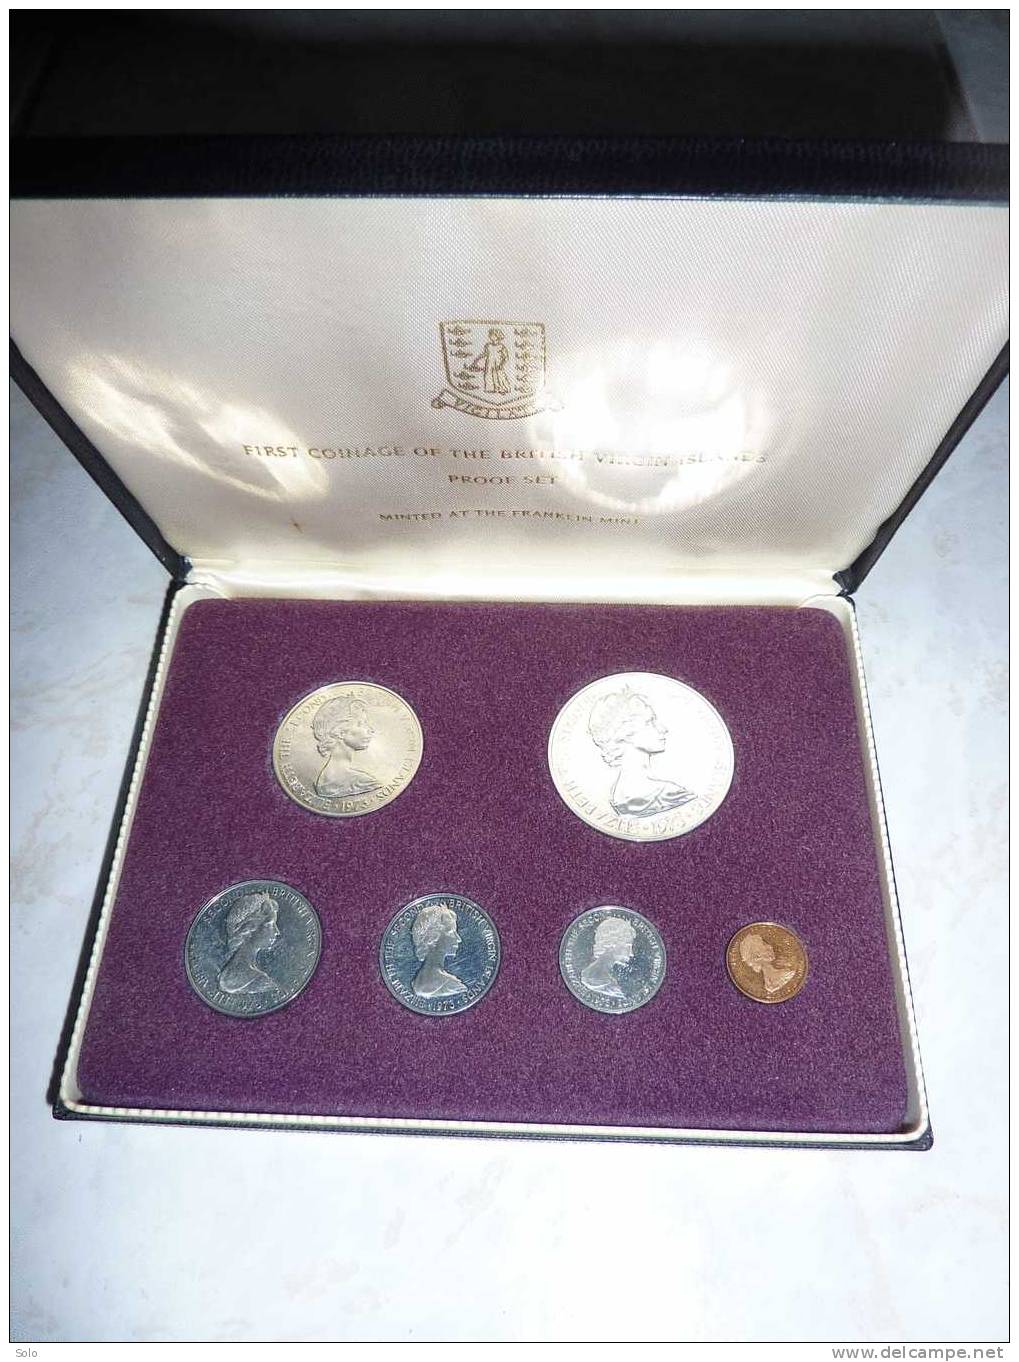 Coffret First Coinage Of The Brtish VIRGIN ISLANDS - PROOF SET  - Minted At The Franklin Mint (1973) - Mint Sets & Proof Sets